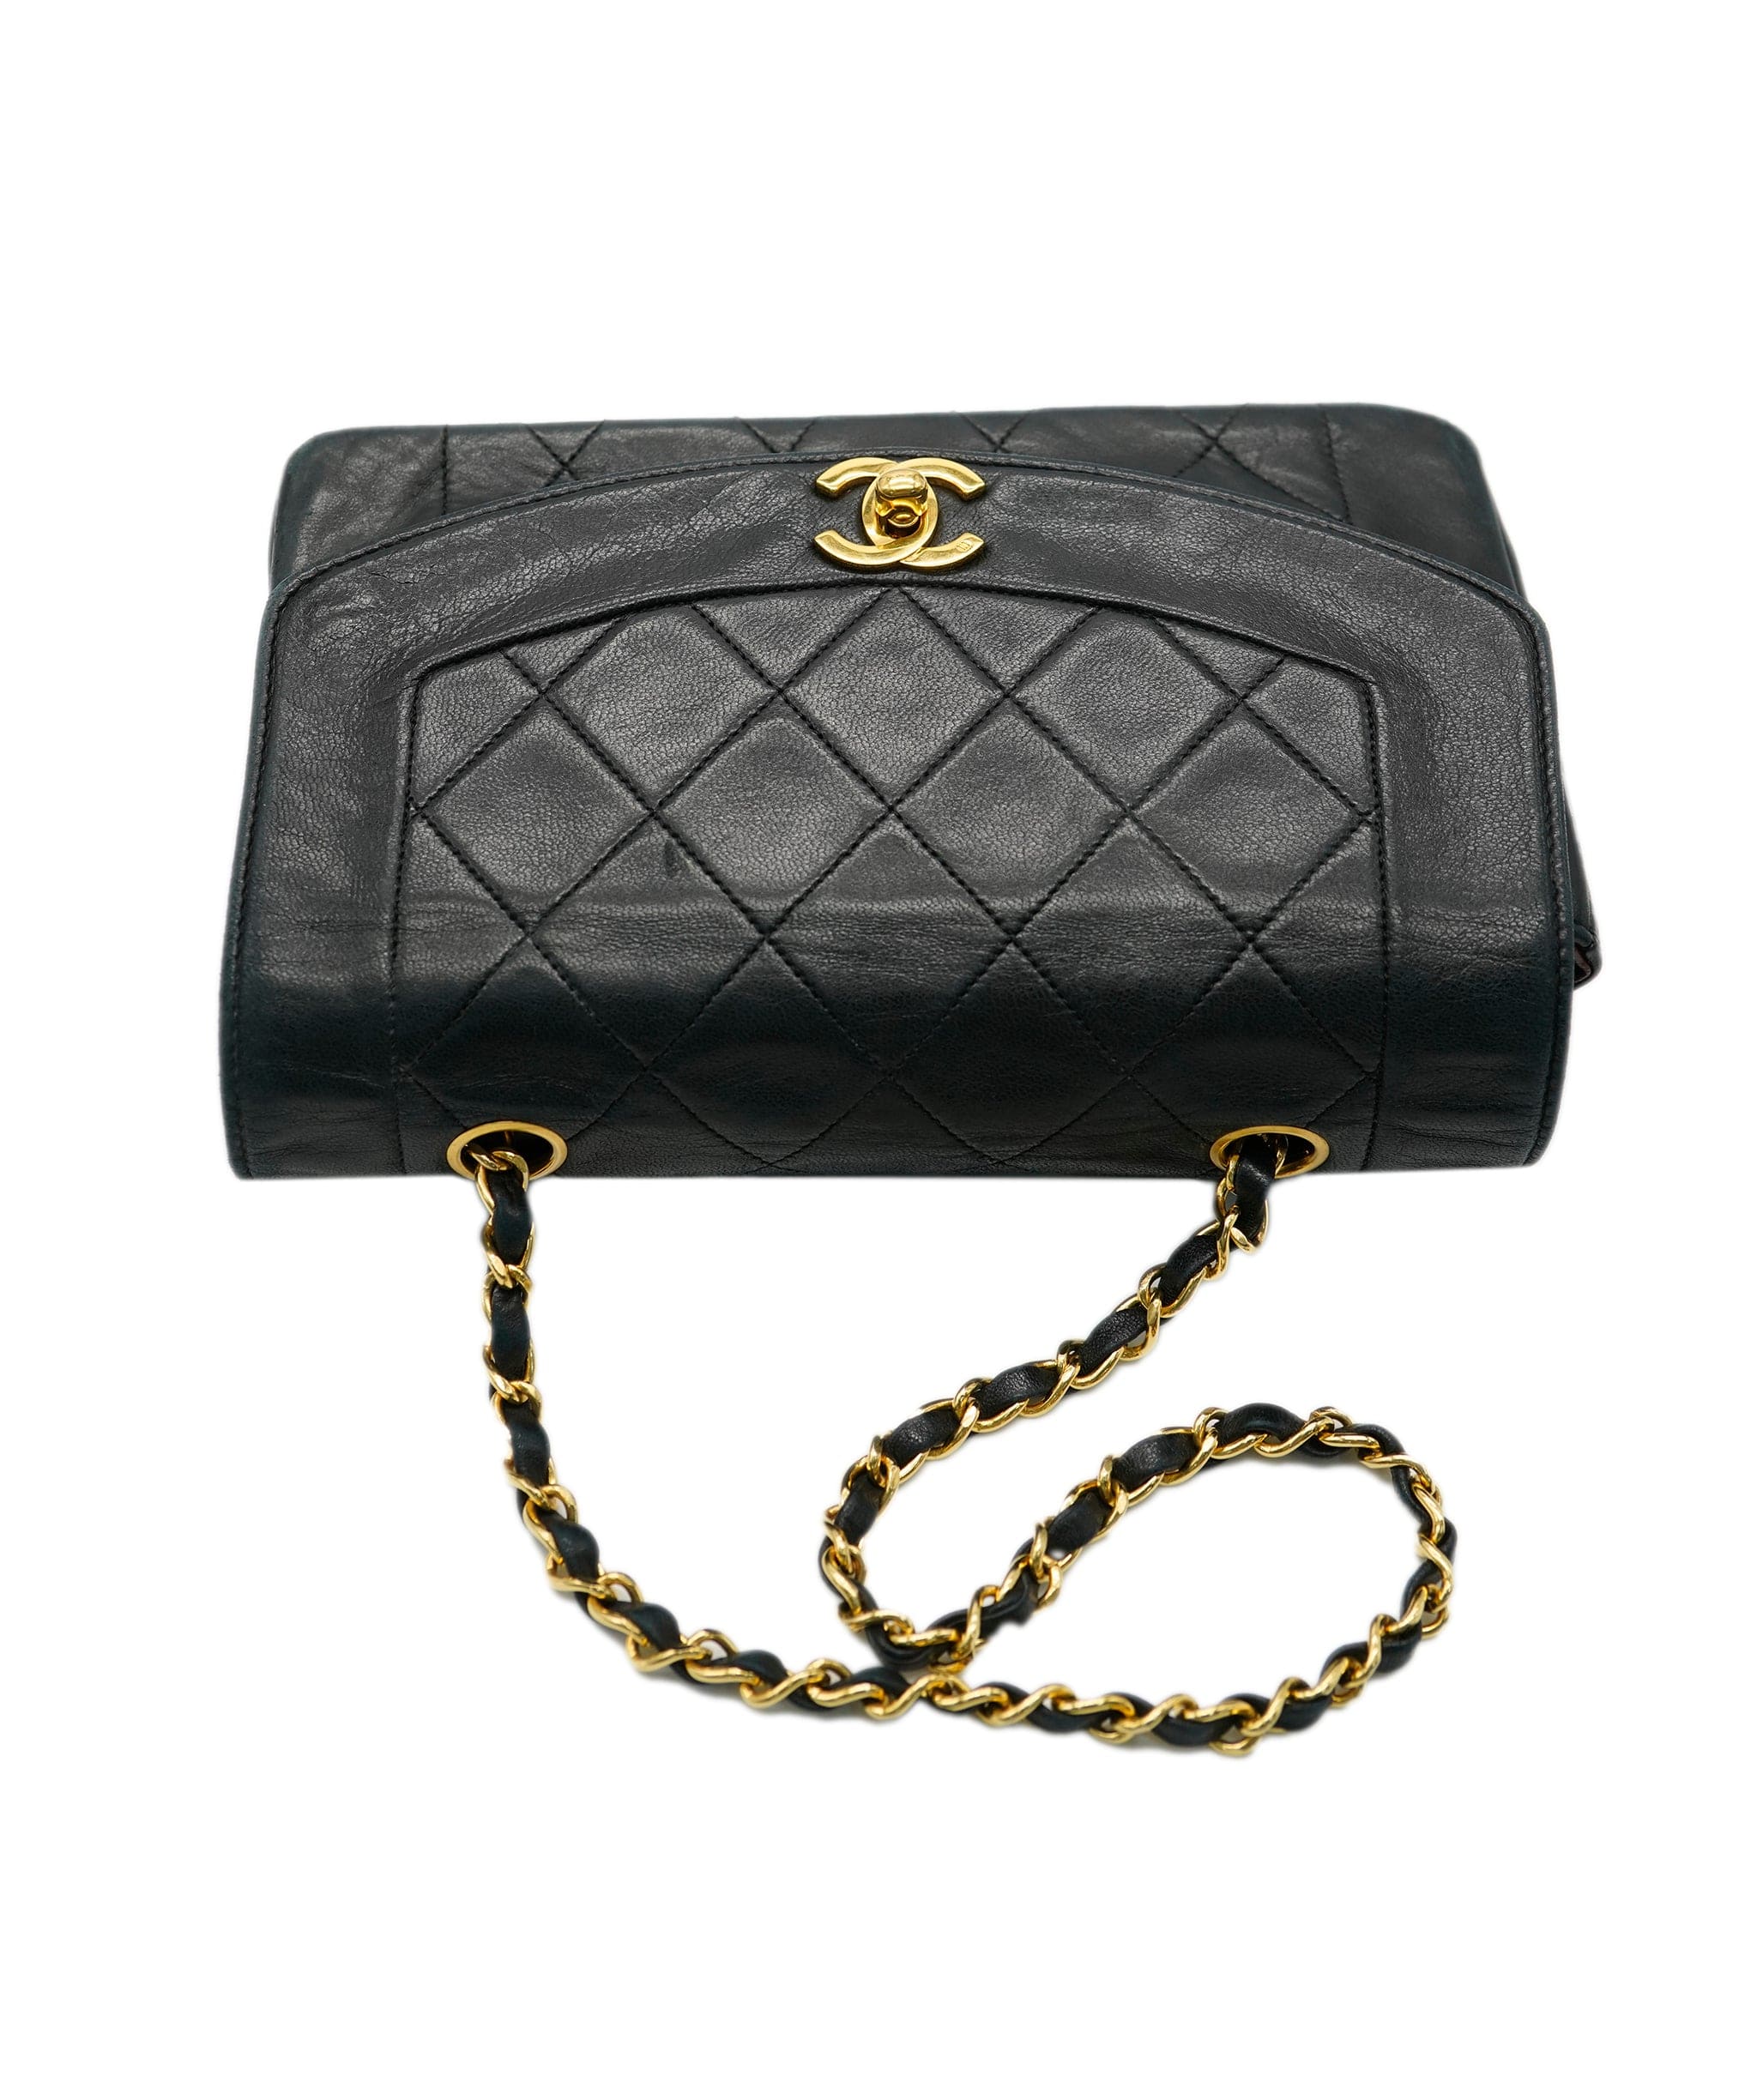 Chanel Chanel small diana black lambskin bag with GHW AJL0187